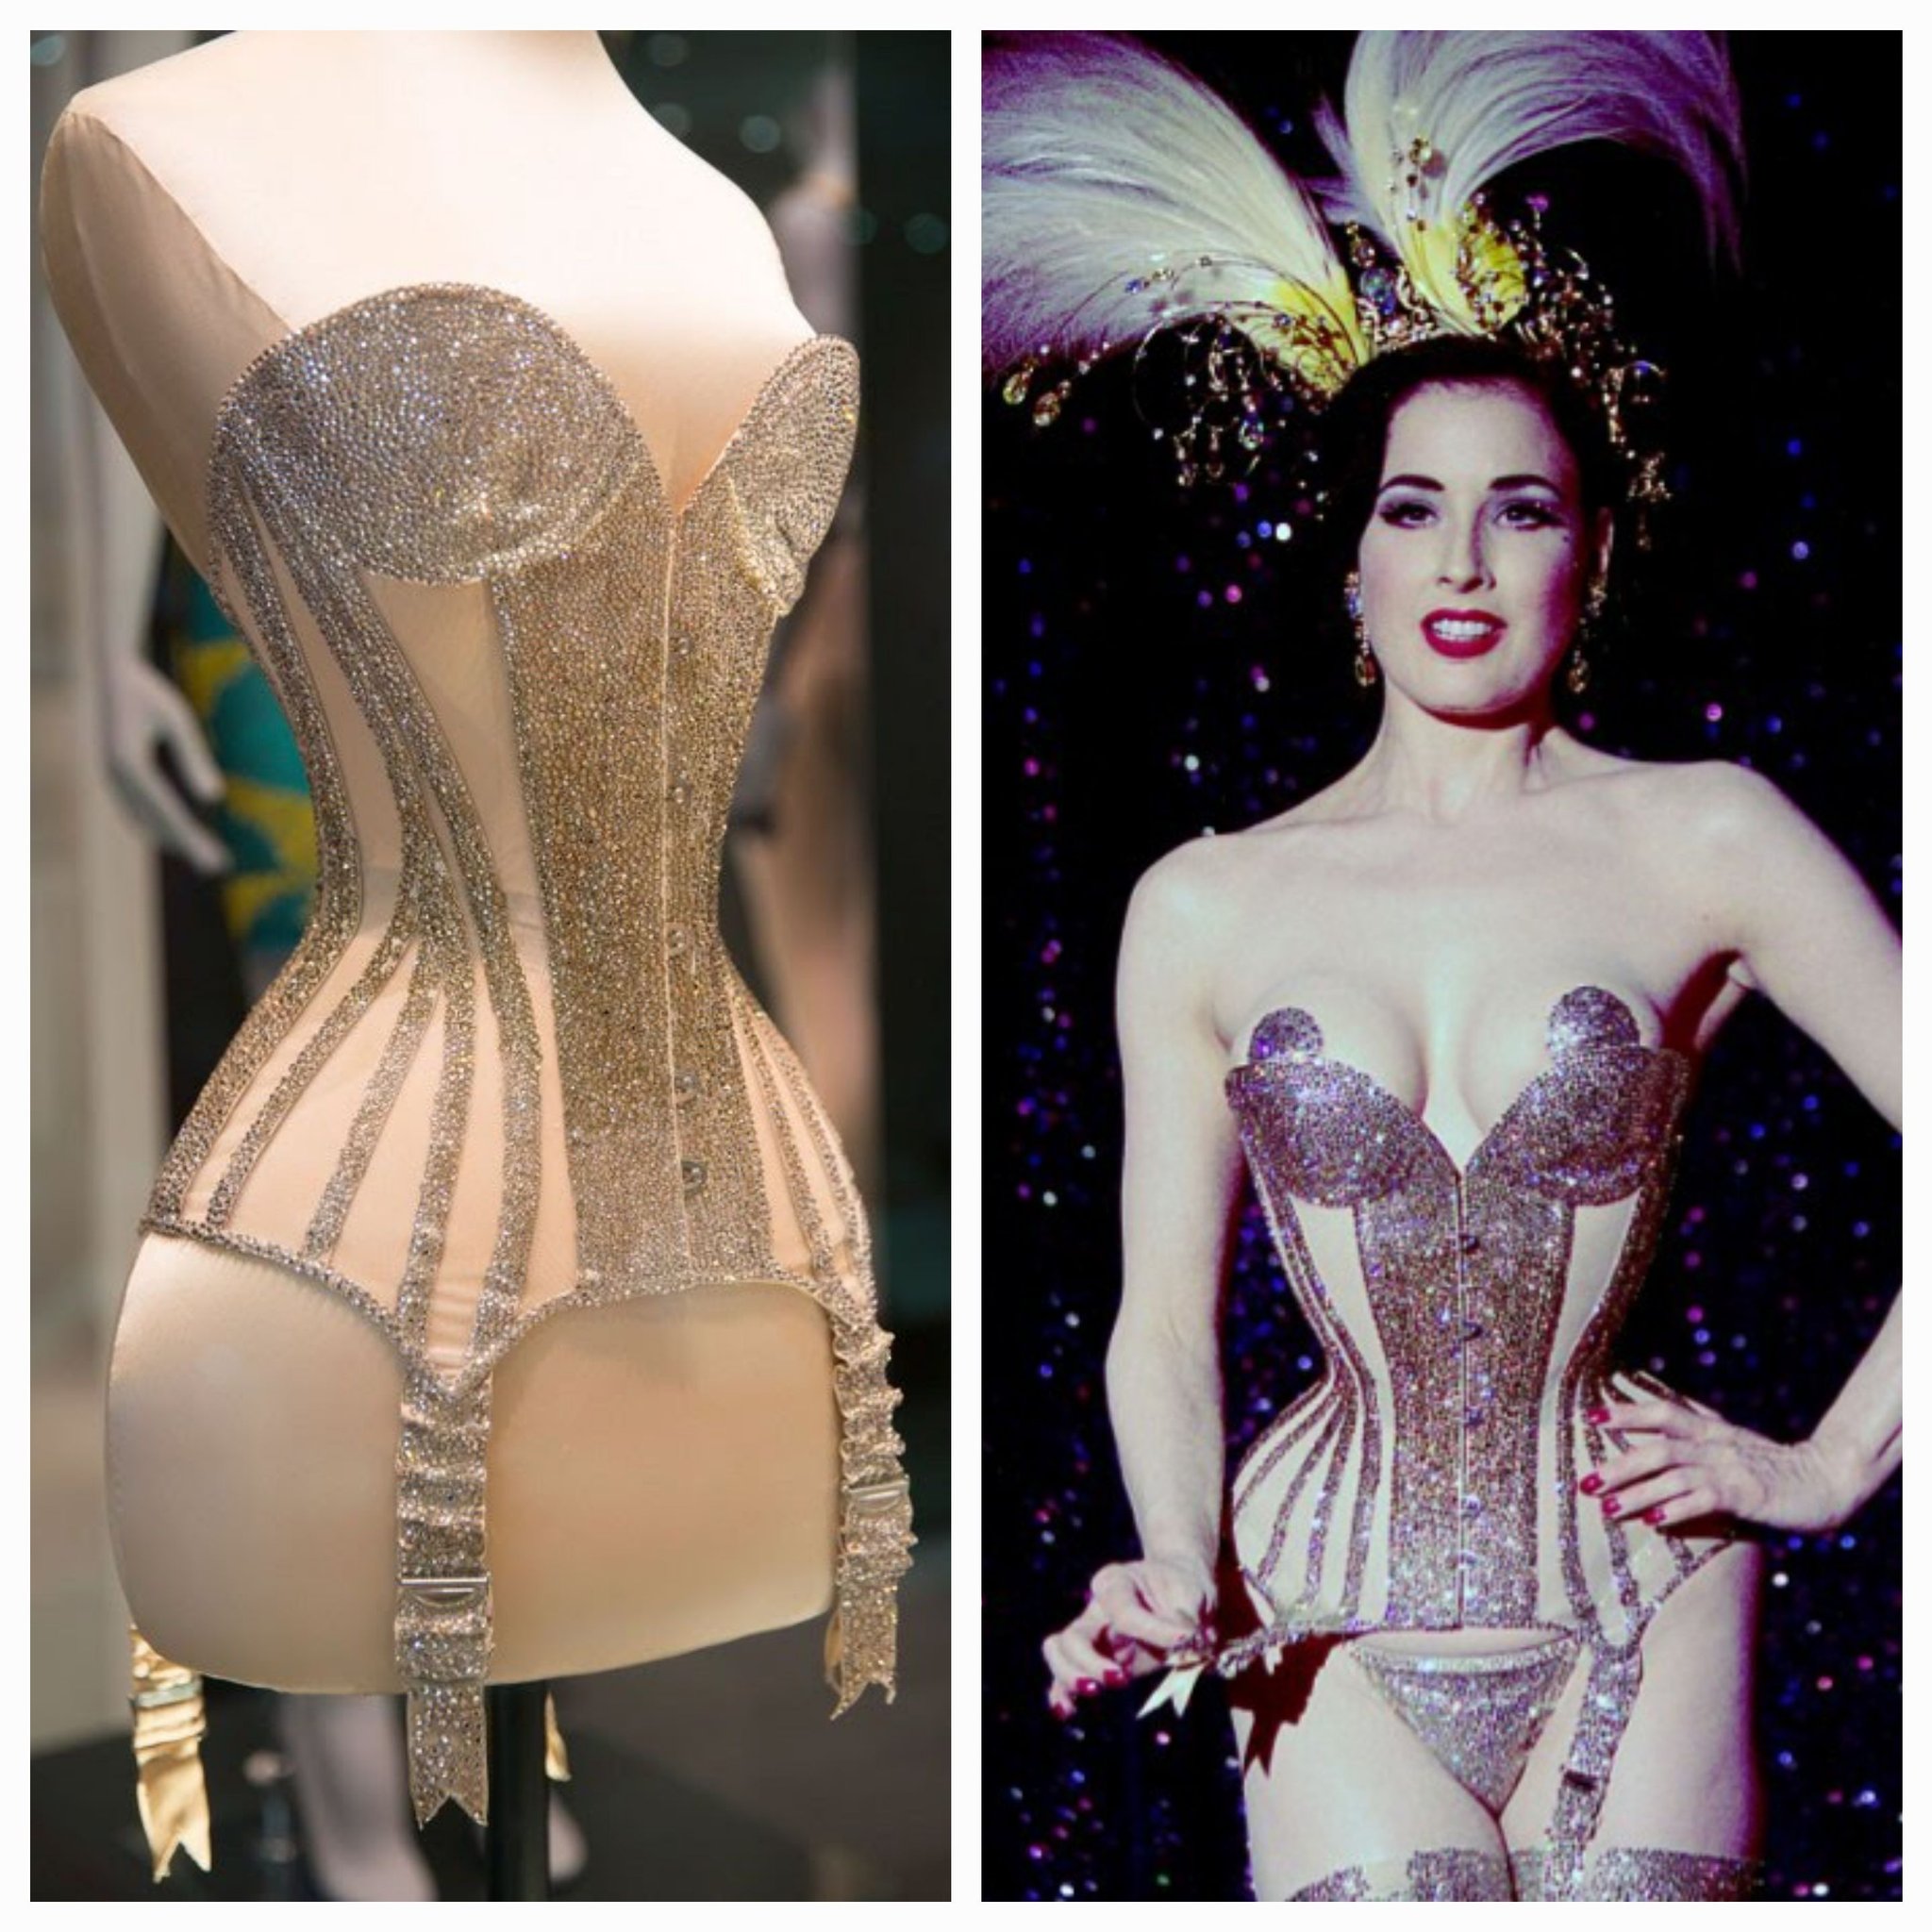 Victoria Haddock on X: Happy birthday to the 'Queen of Burlesque'  @DitaVonTeese, who was born #OnThisDay. This gorgeous swarovski crystal  corset was made for Von Teese by renowned corsetmaker Mr Pearl in